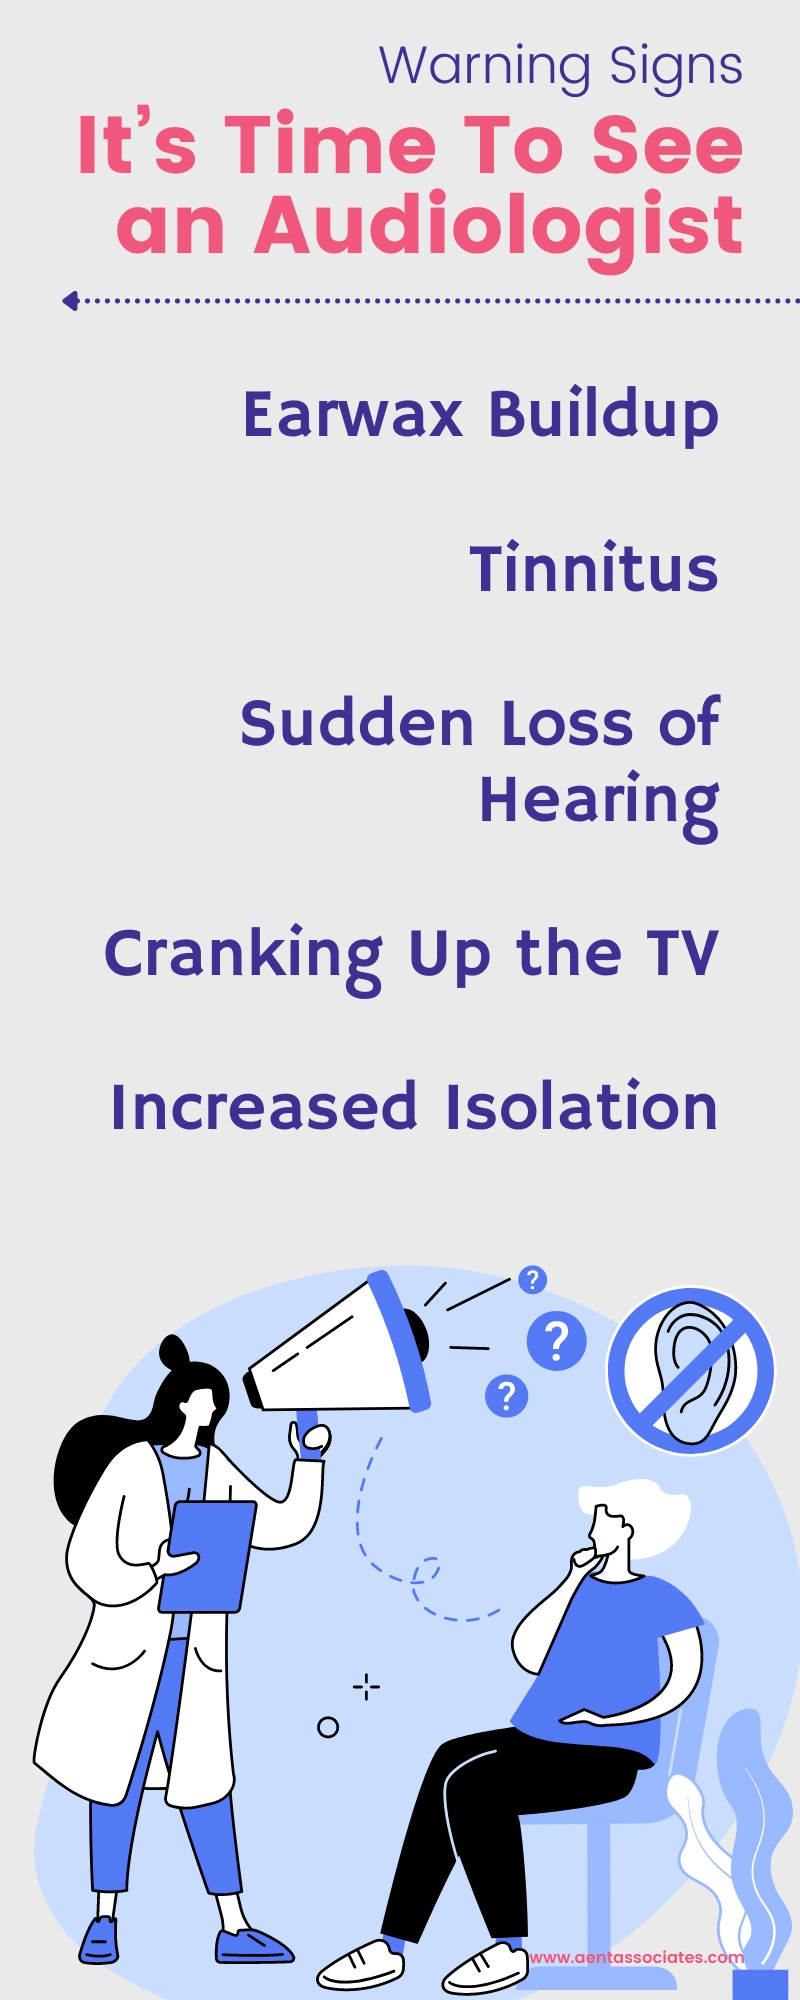 Warning Signs It’s Time To See an Audiologist